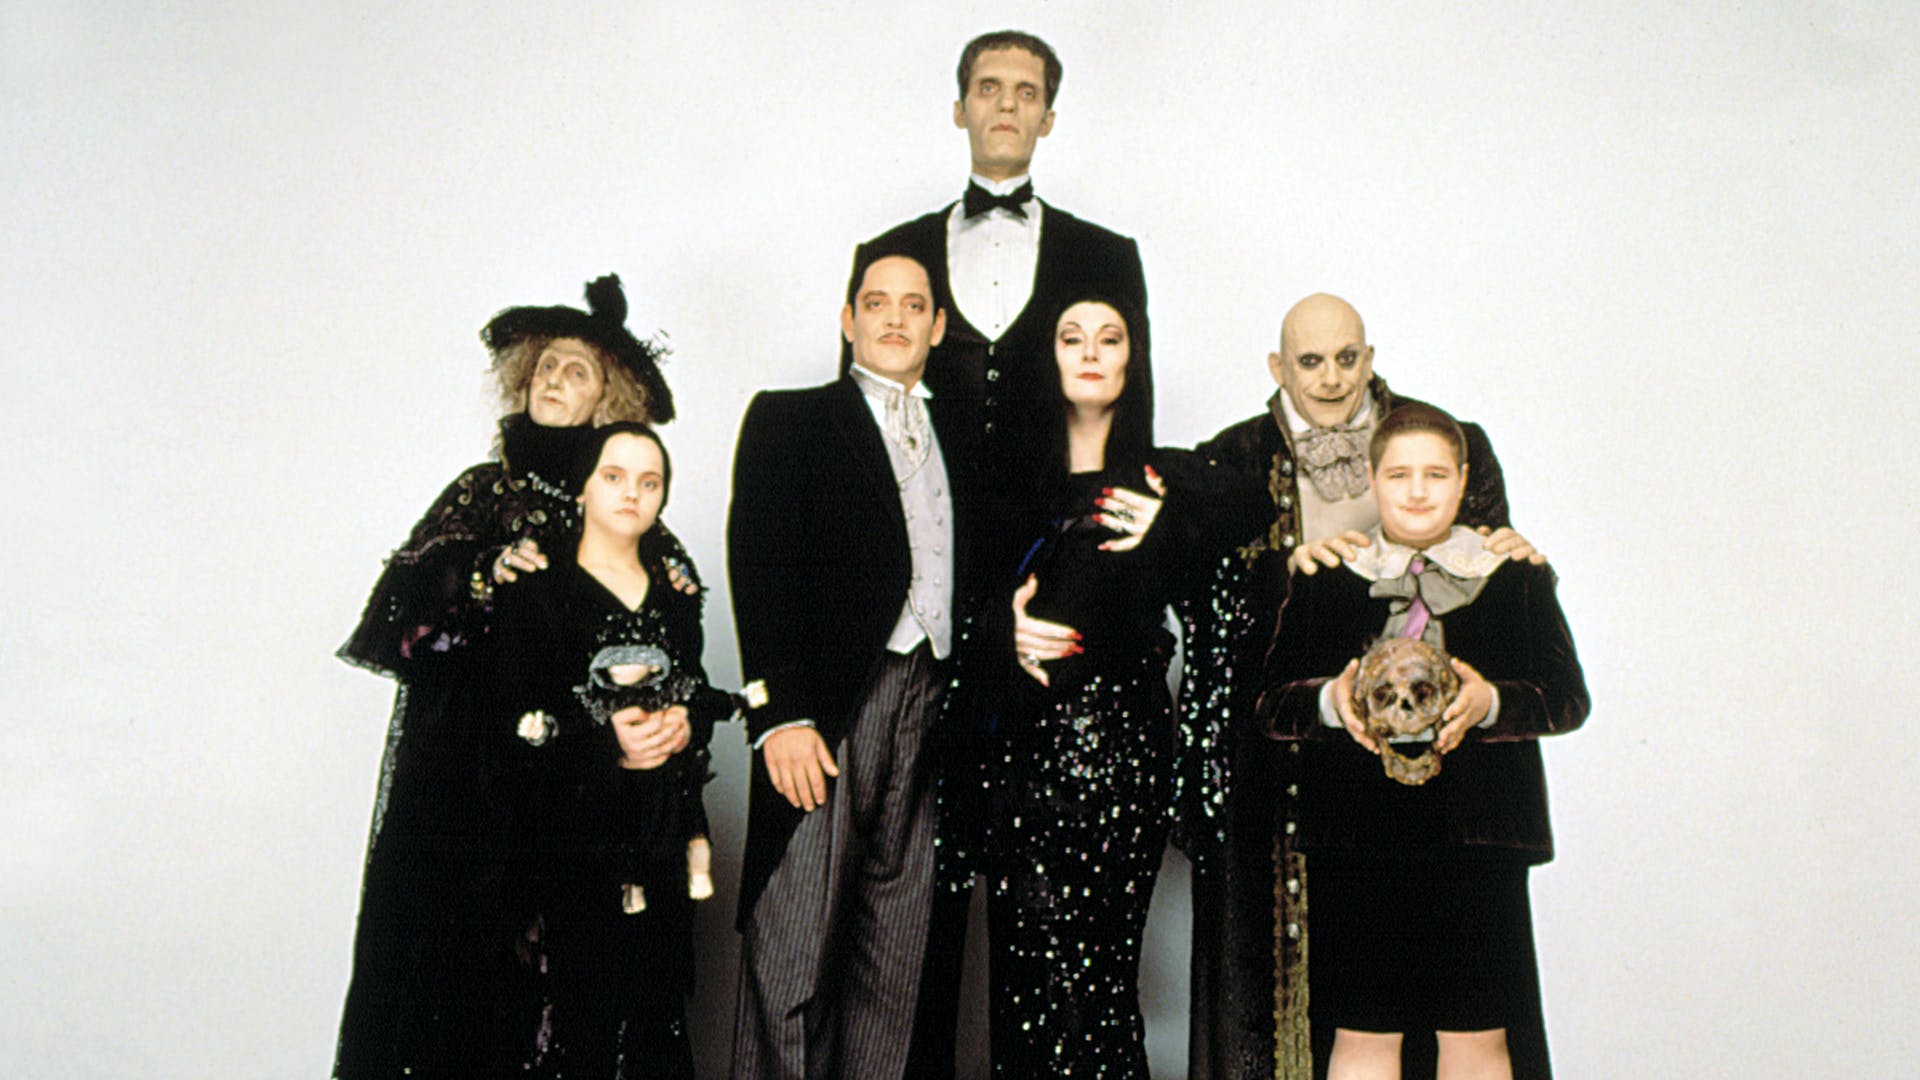 The Addams Family' & 'Addams Family Values' Cast: Where Are They Now?